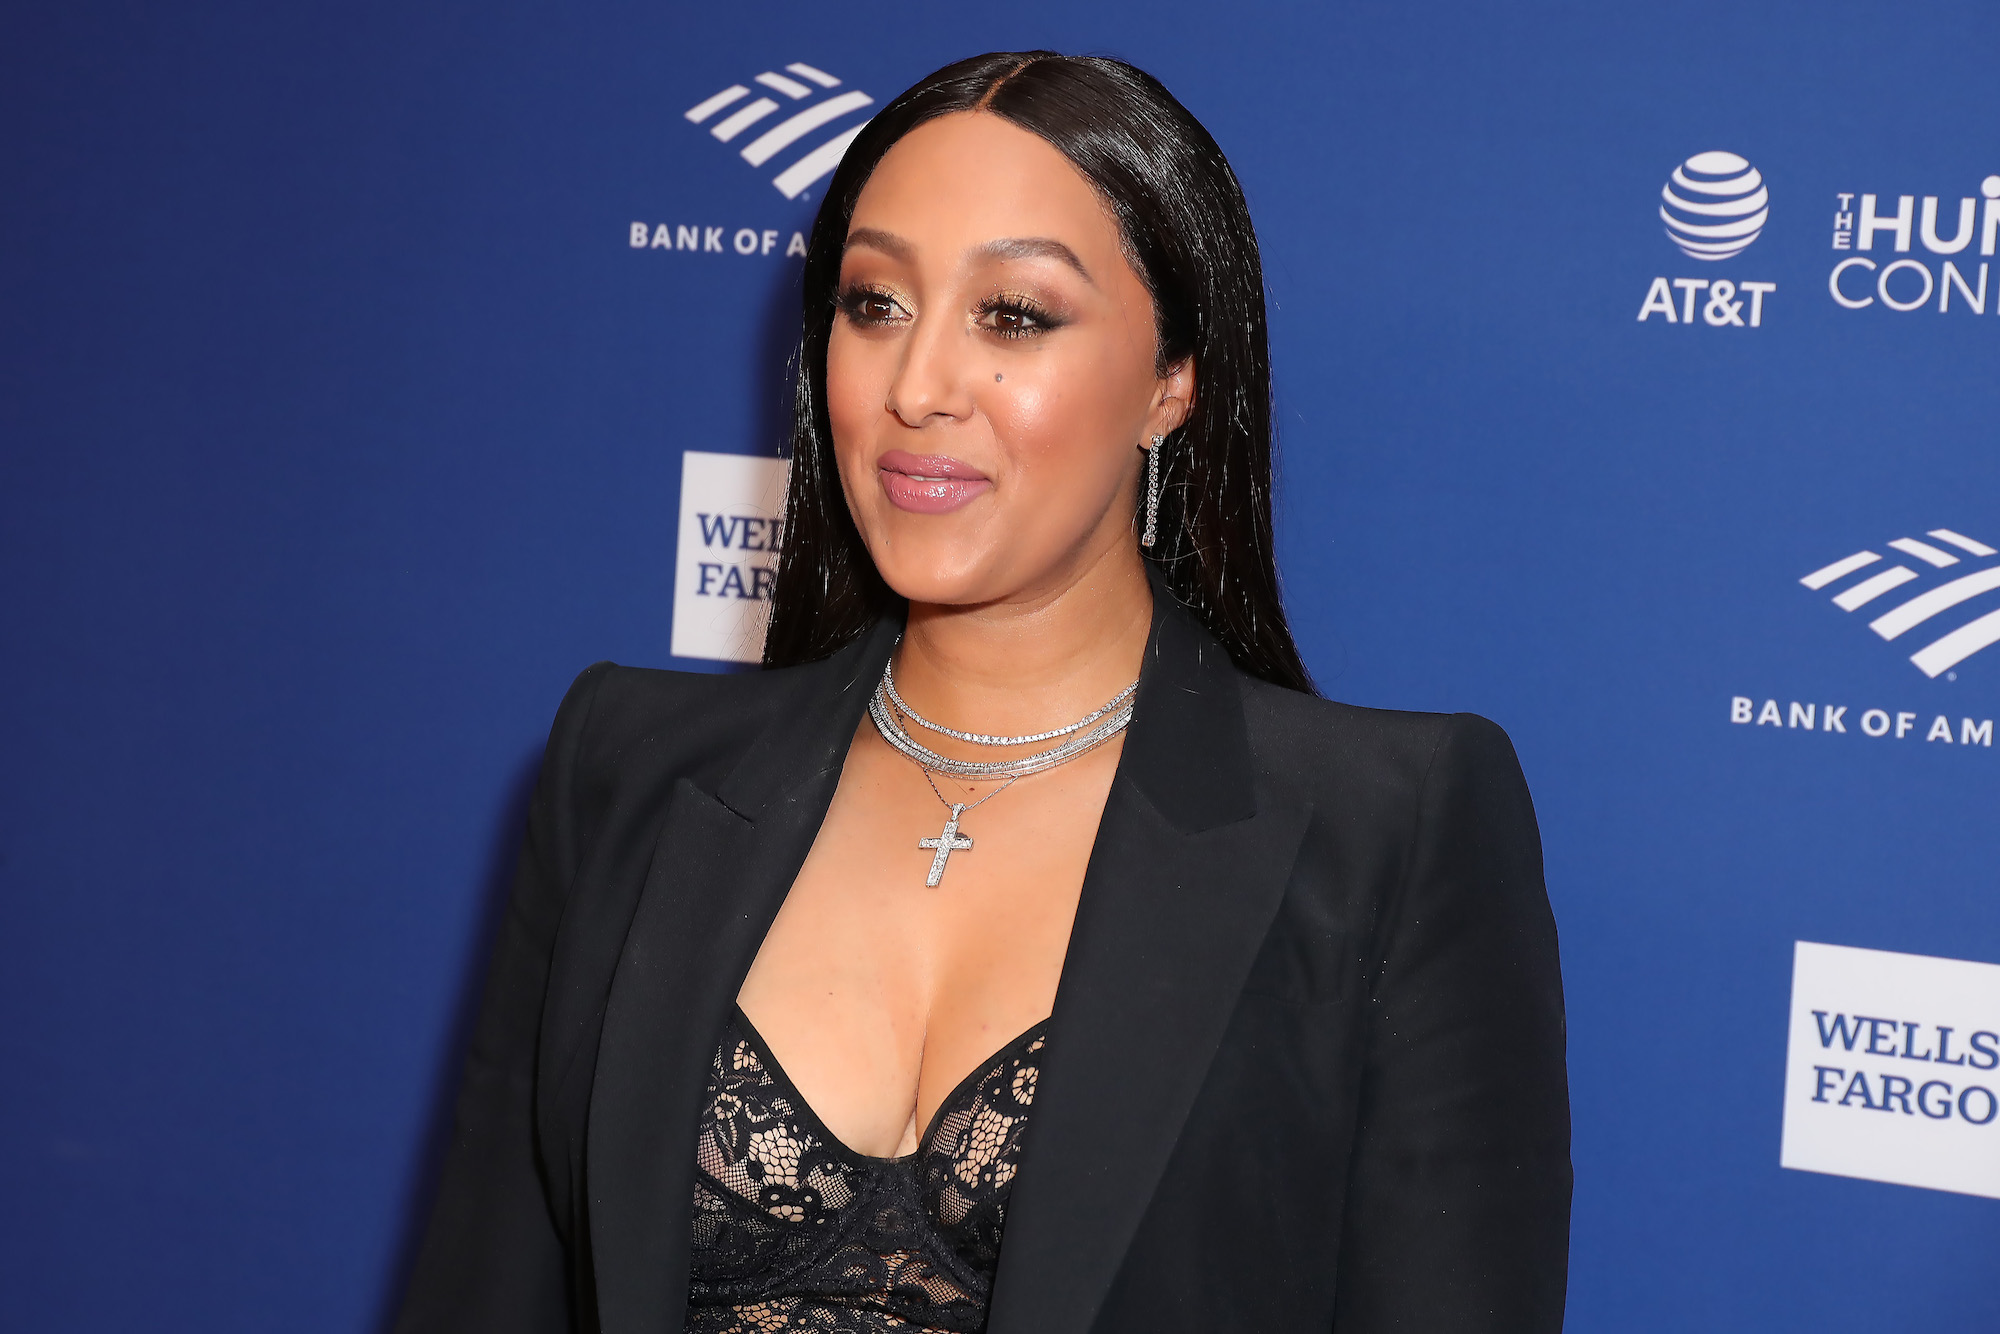 Tamera Mowry-Housley smiling in front of a blue background